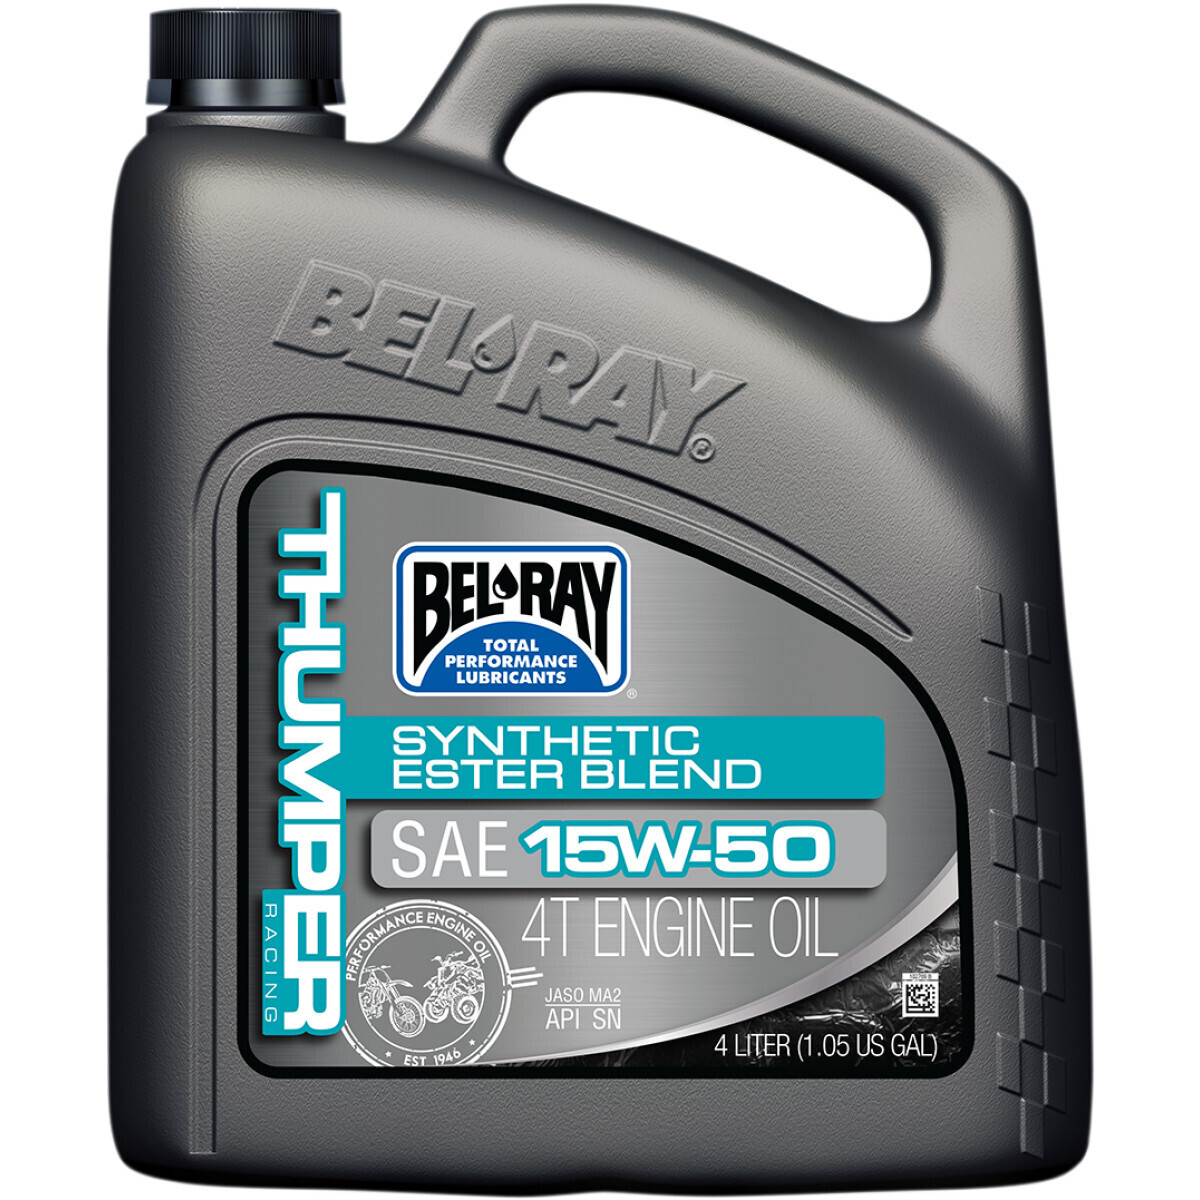 BEL-RAY
THUMPER RACING SYNTHETIC ESTER BLEND 4-STROKE ENGINE OIL 15W-50 4 LITER